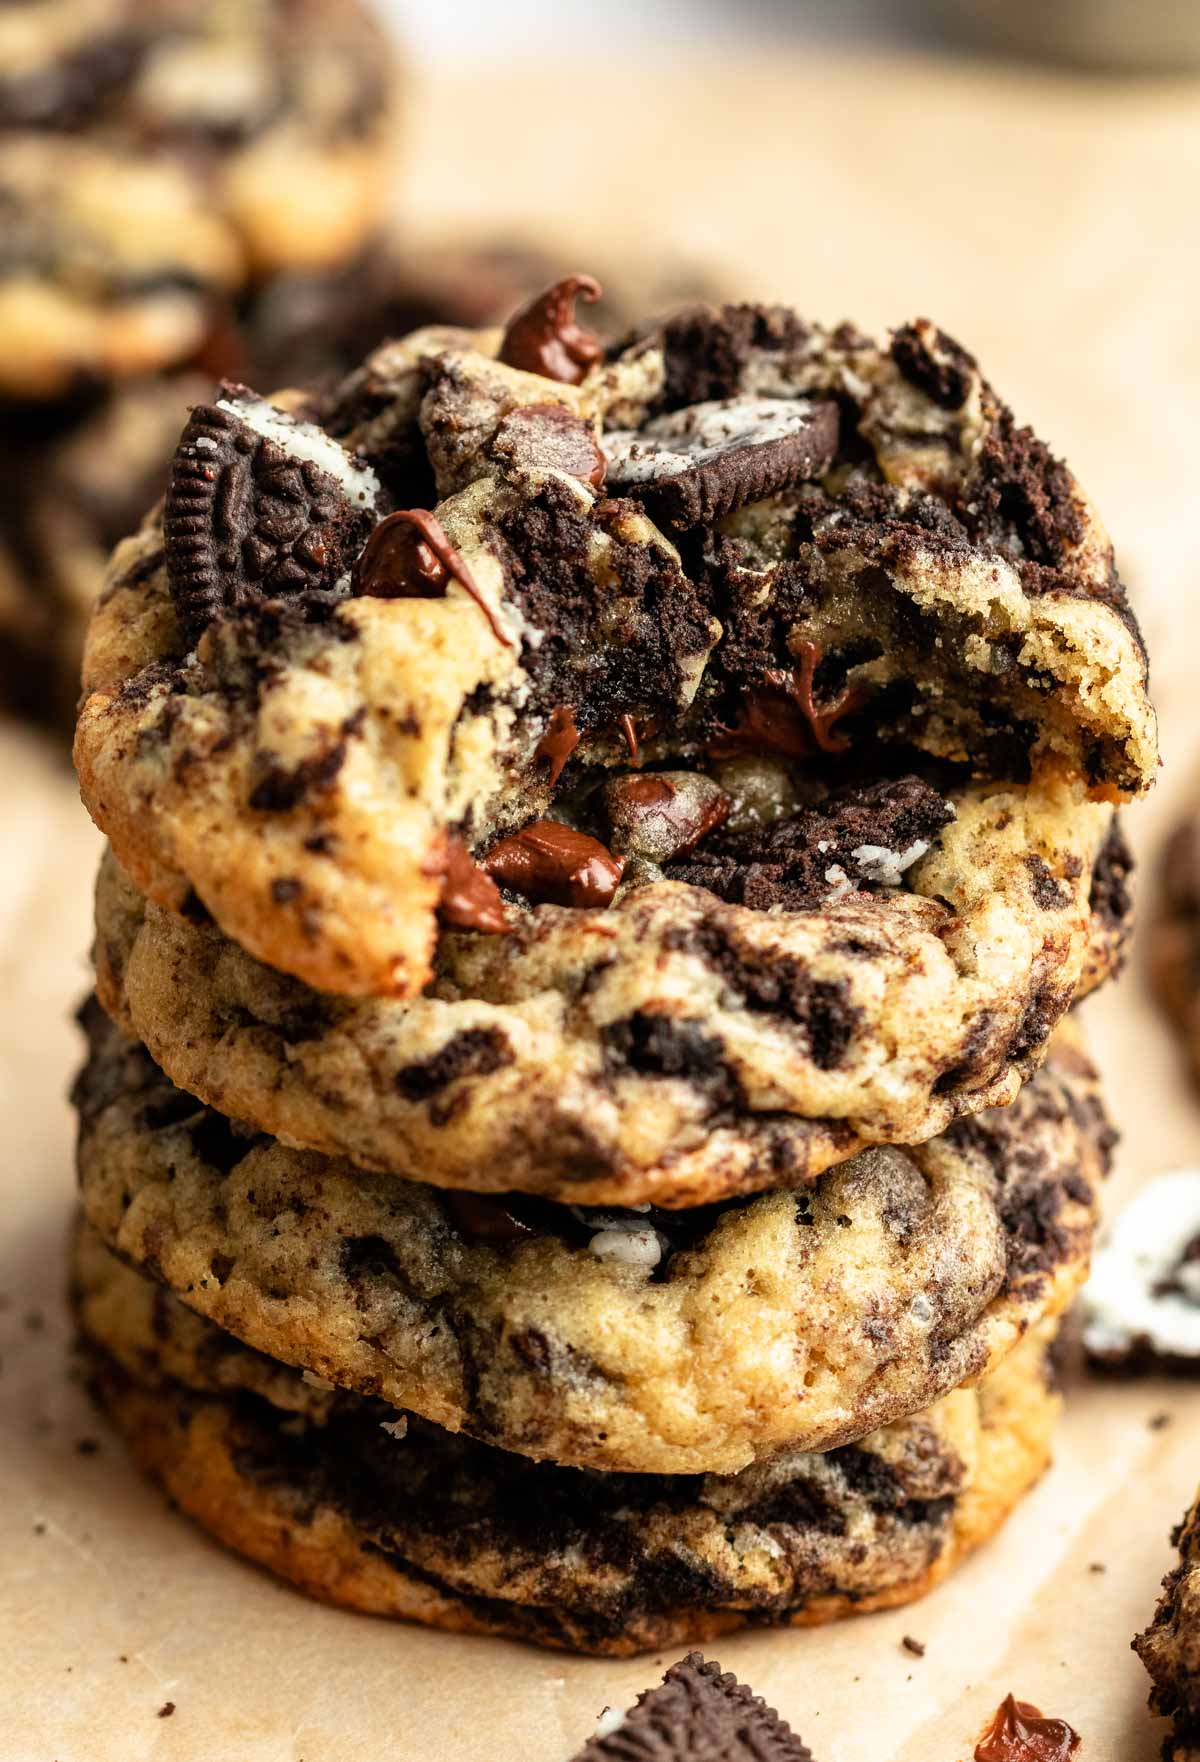 Stack of oreo chocolate chip cookies with the top cookie missing a bite.